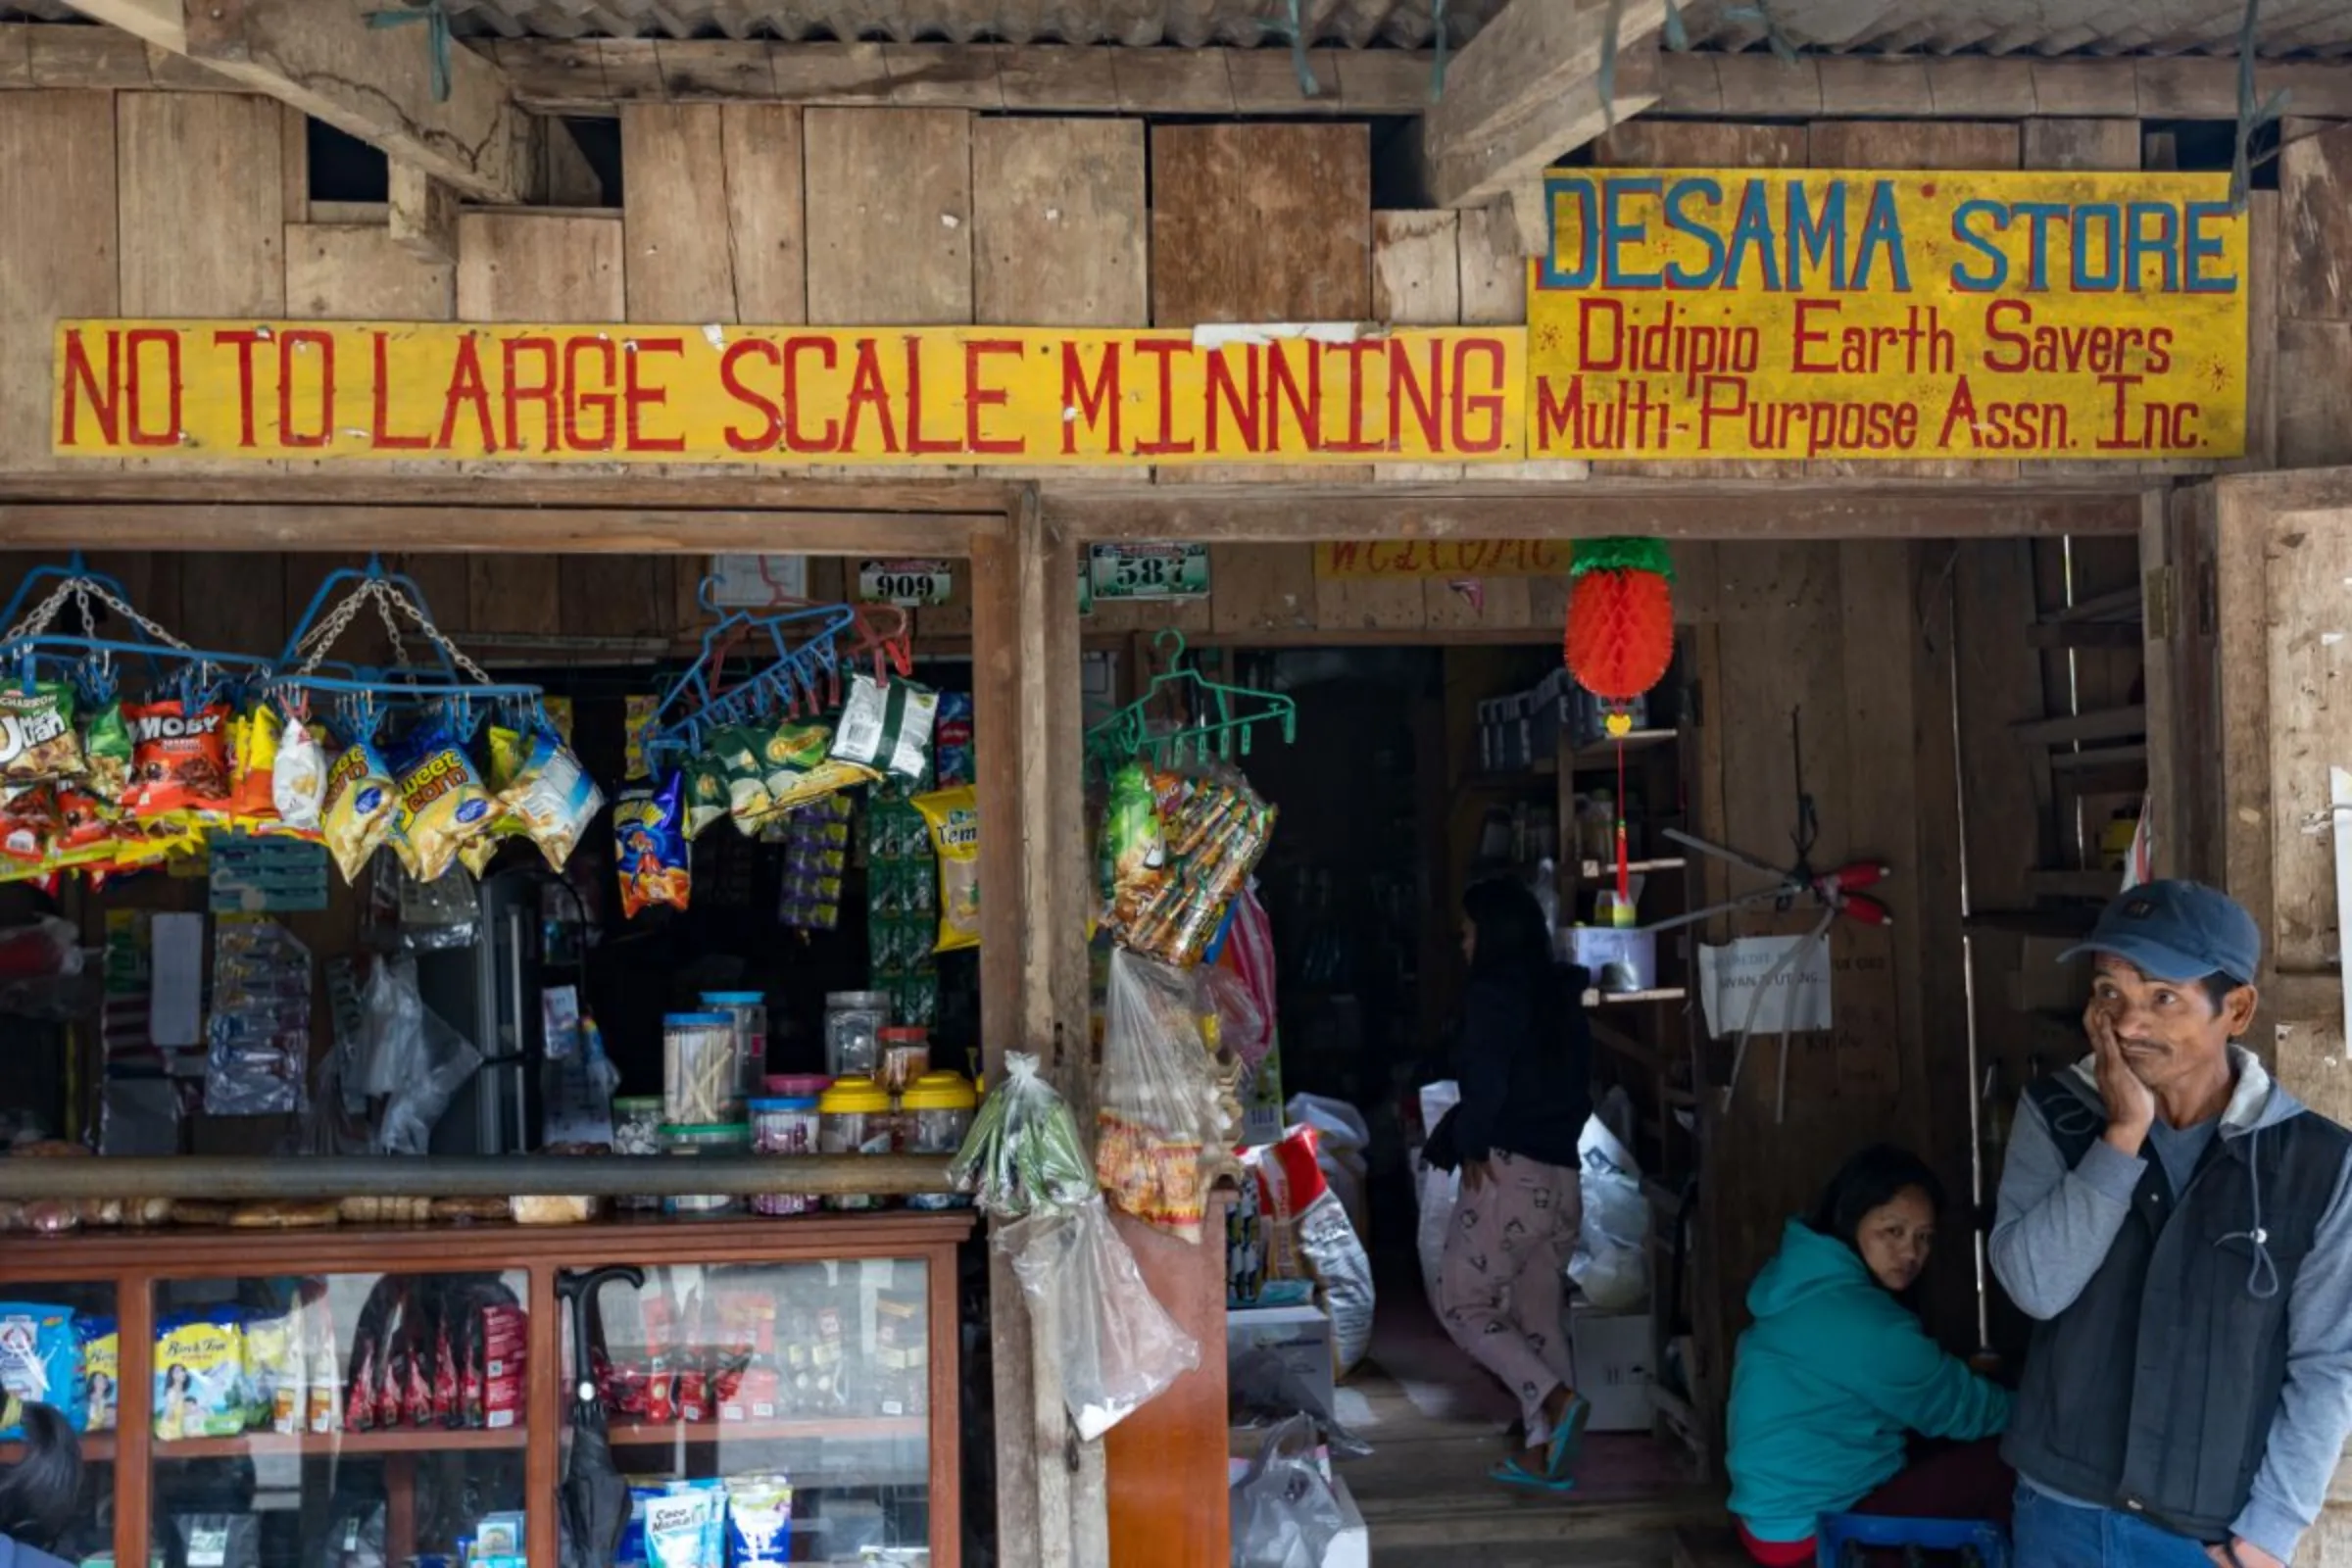 Anti-mining slogans displayed at a store run by a community group pushing for the closure of a mine in Didipio, the Philippines. Thomson Reuters Foundation/ Kathleen Lei Limayo